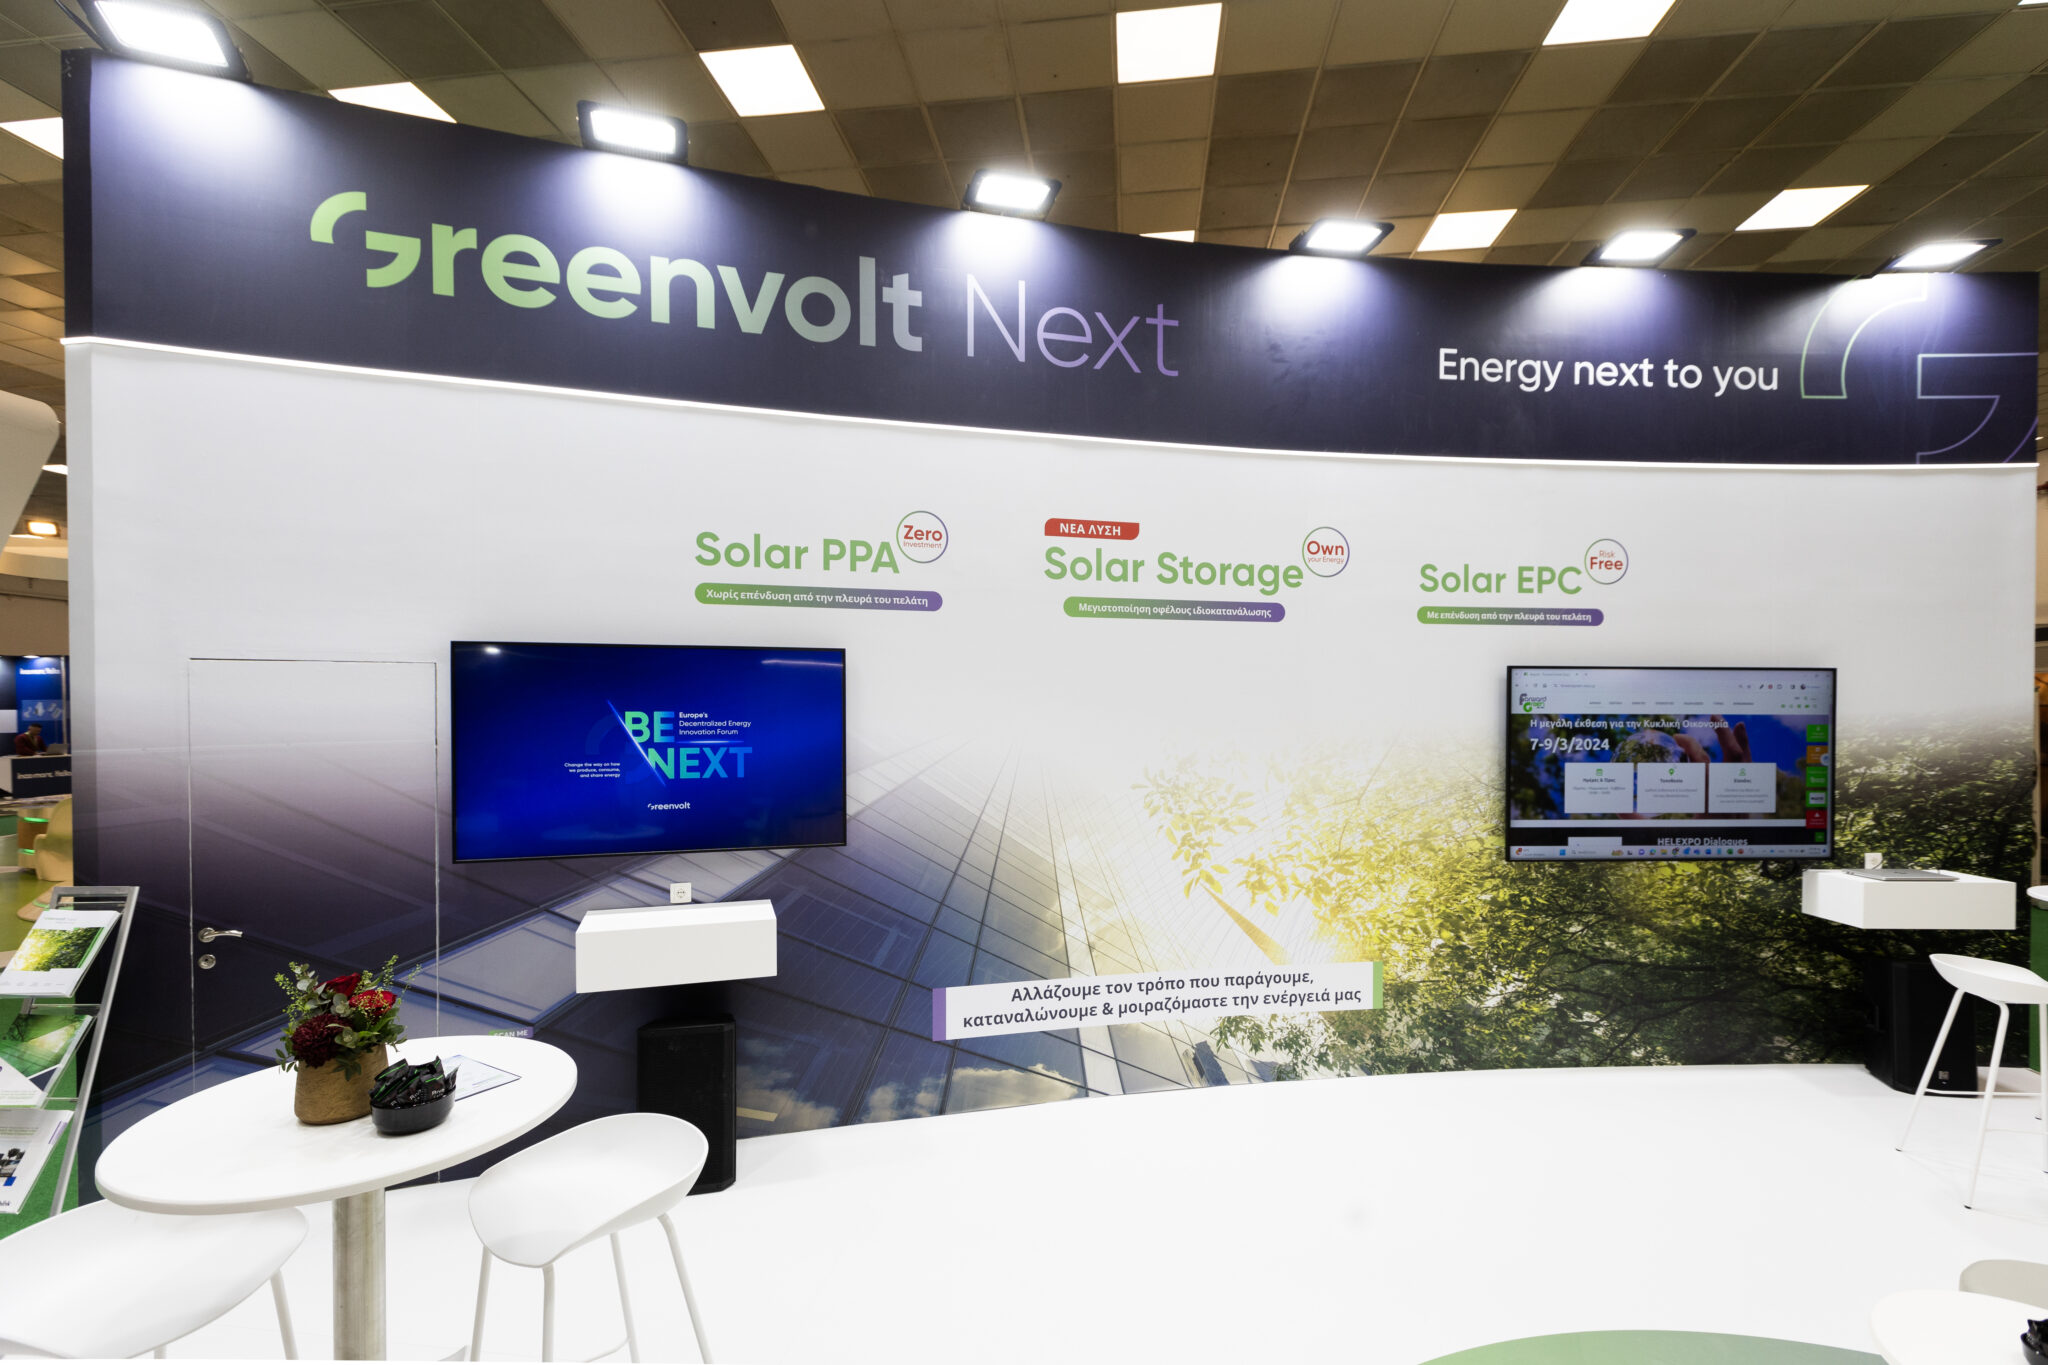 Greenvolt Next: The company’s environmental achievement, one year after entering the Greek market